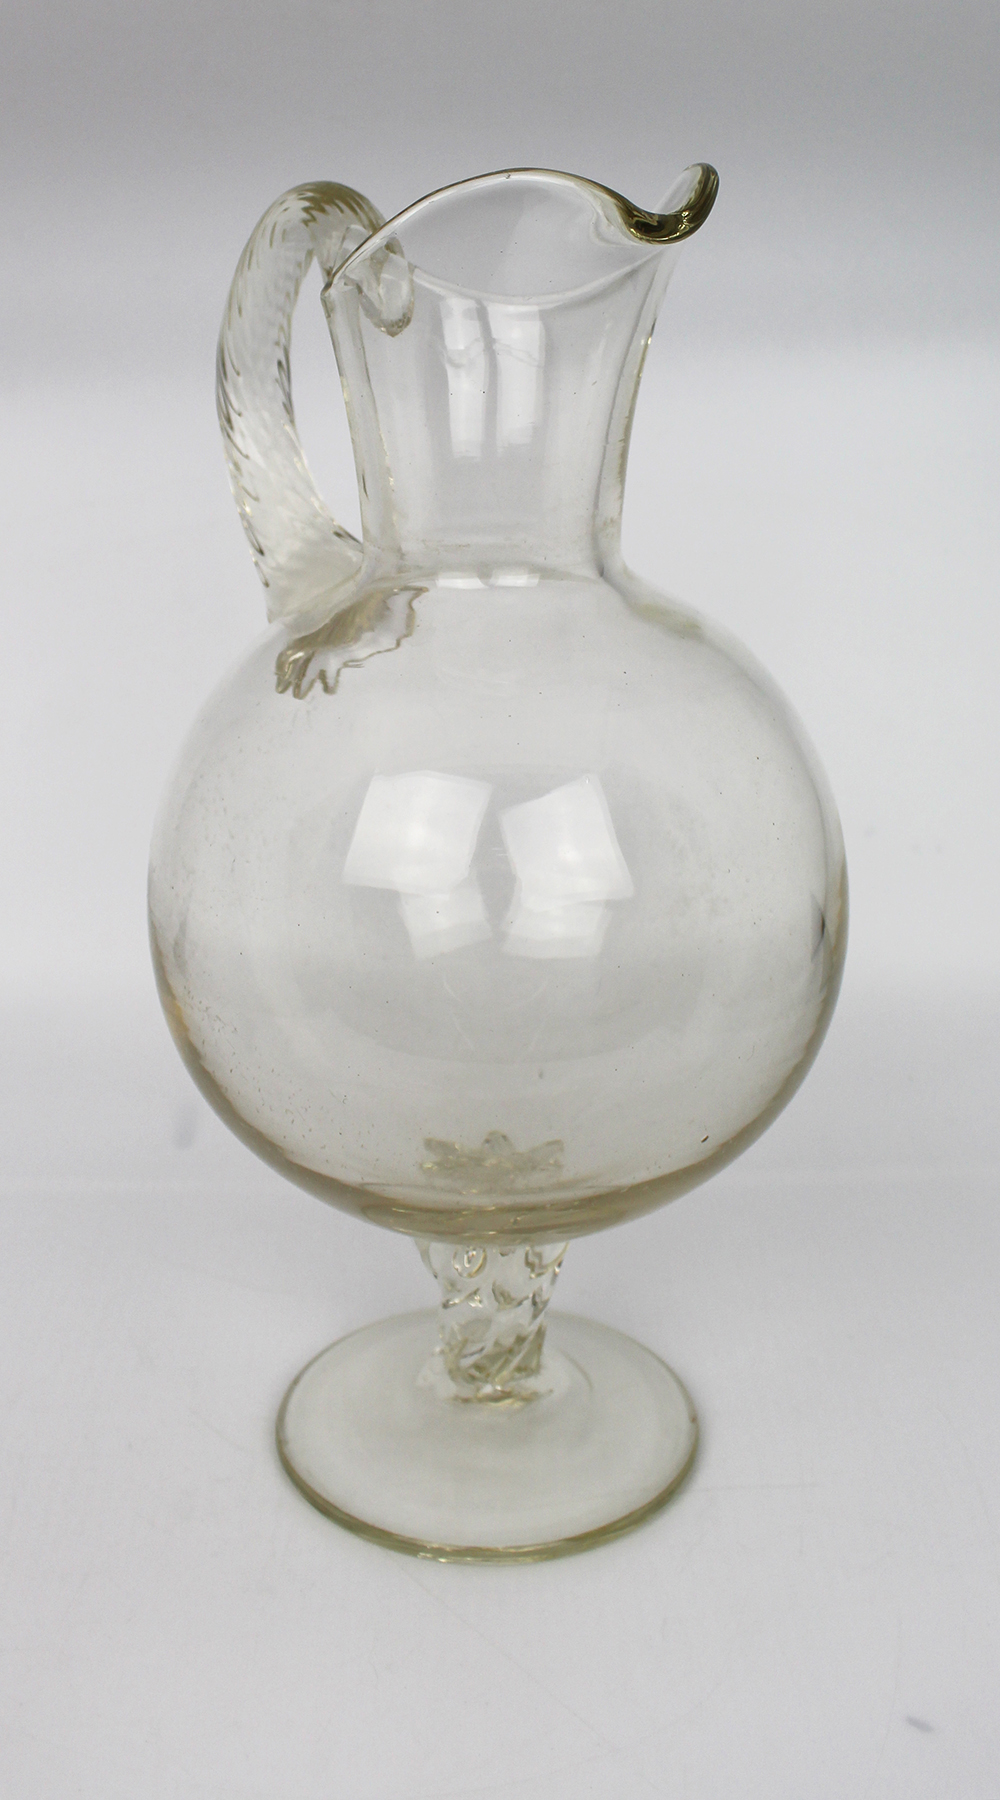 Antique Glass Footed Ewer - Image 2 of 6